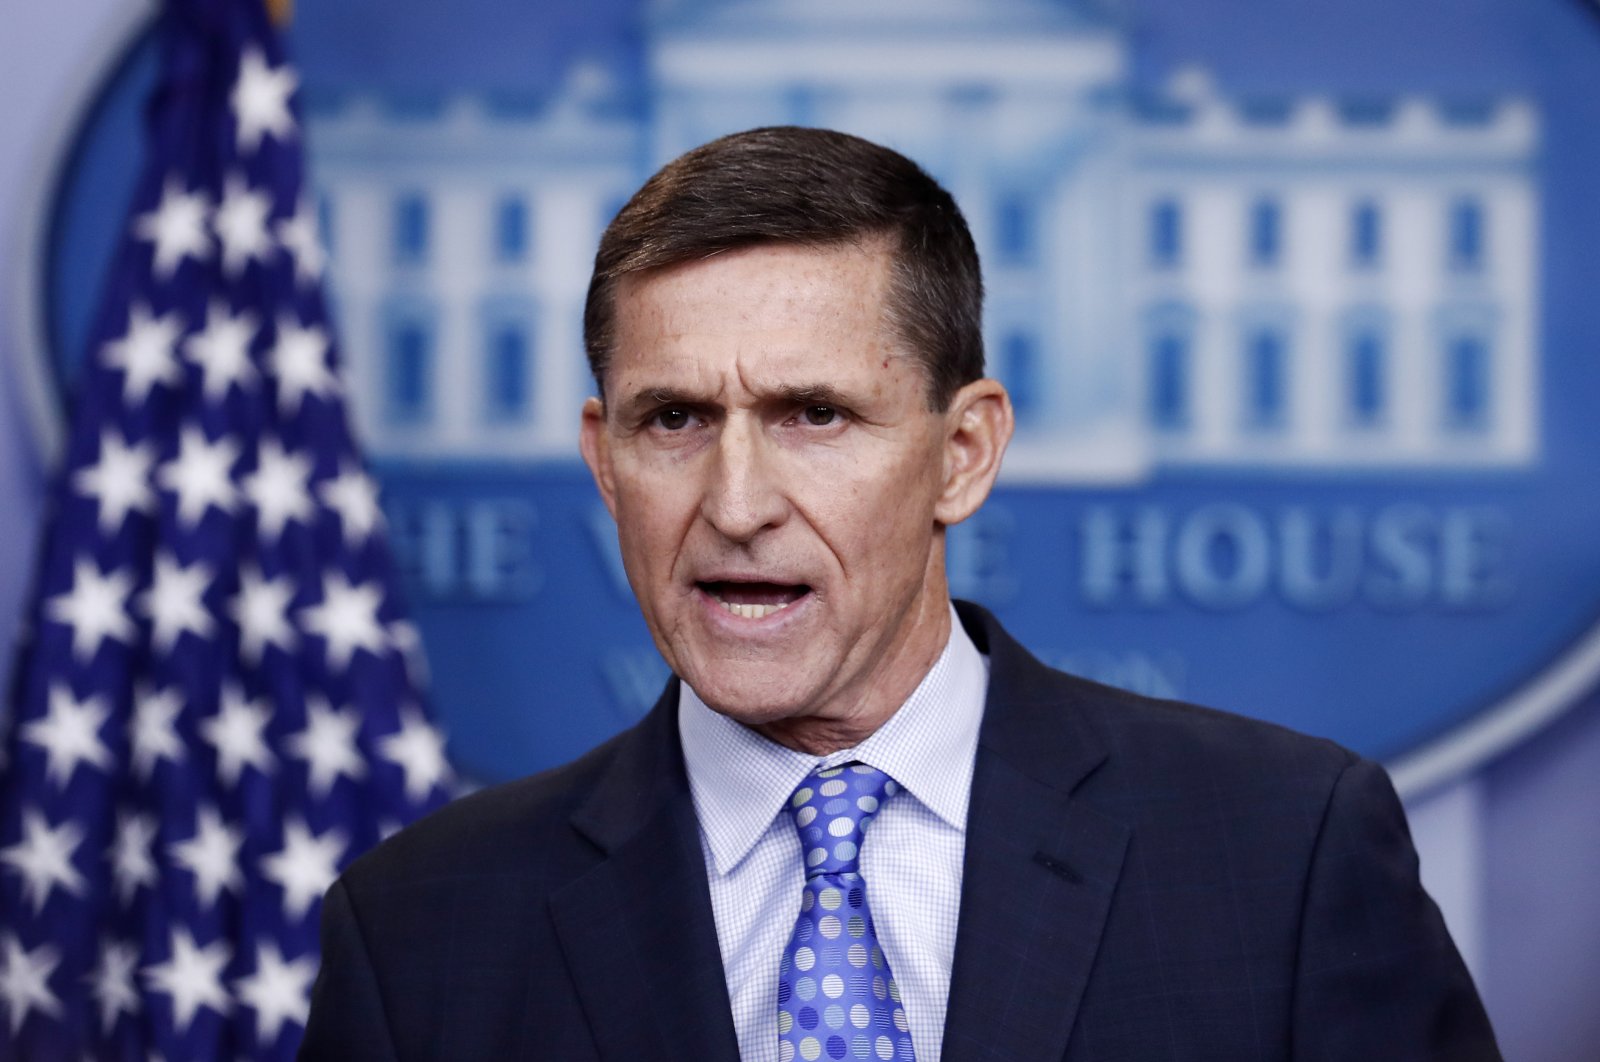 Former U.S. National Security Adviser Michael Flynn speaks during the daily news briefing at the White House, Washington, Feb. 1, 2017. (AP Photo)